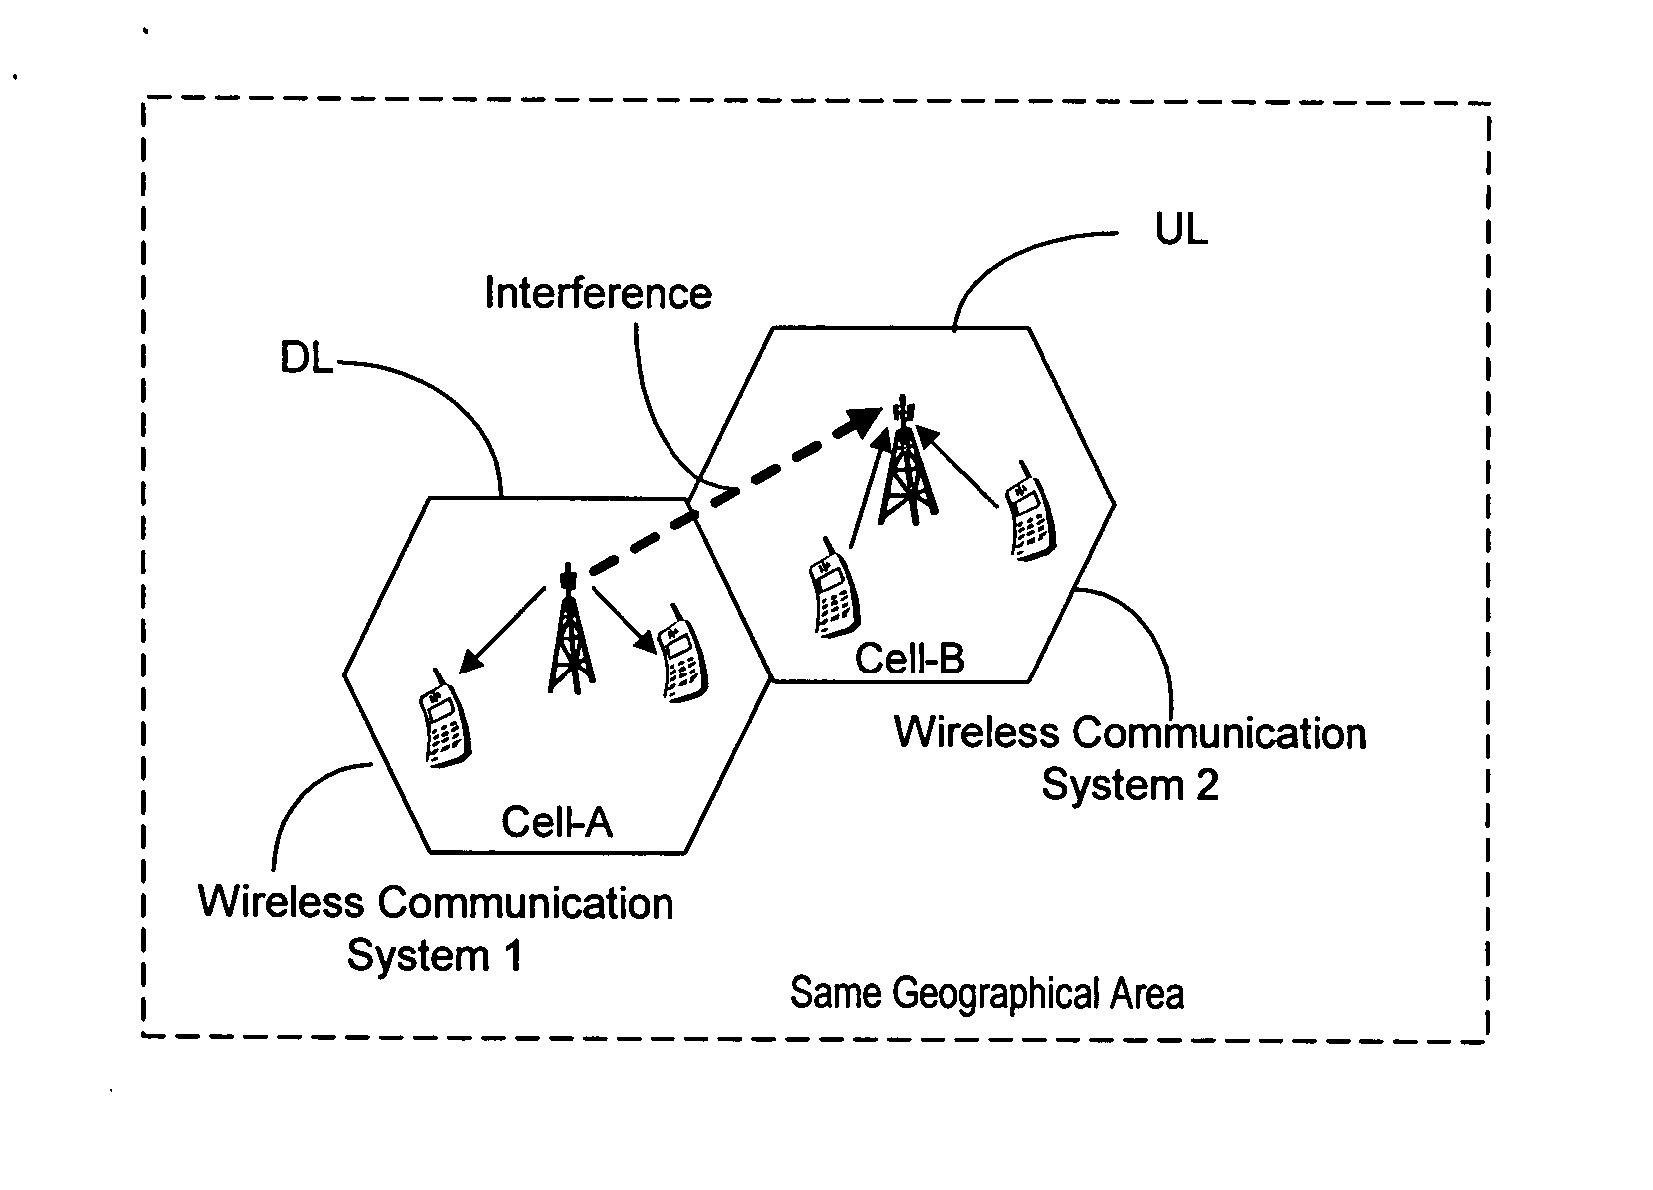 Method and apparatus for reducing the guard band between wireless communication systems operating in the same geographical area